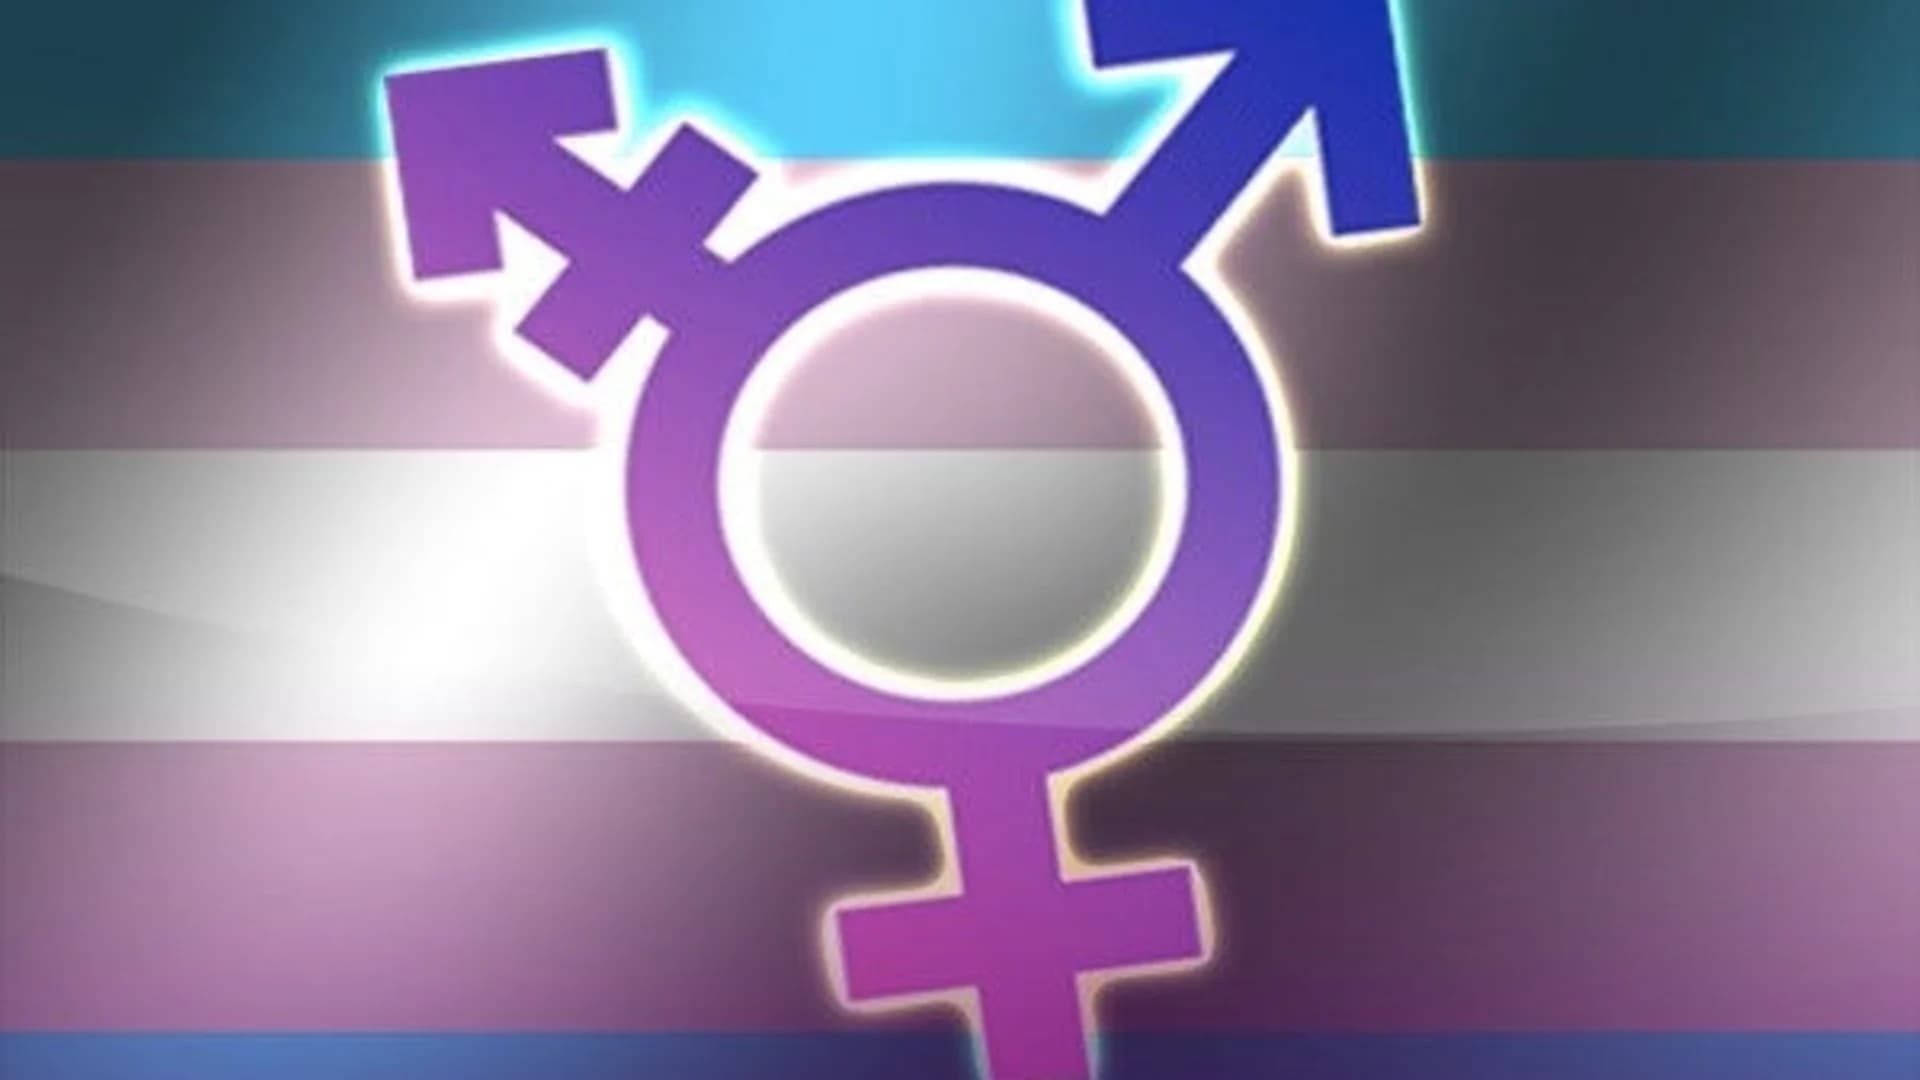 Boy or girl? Some parents letting child choose gender when they are ready